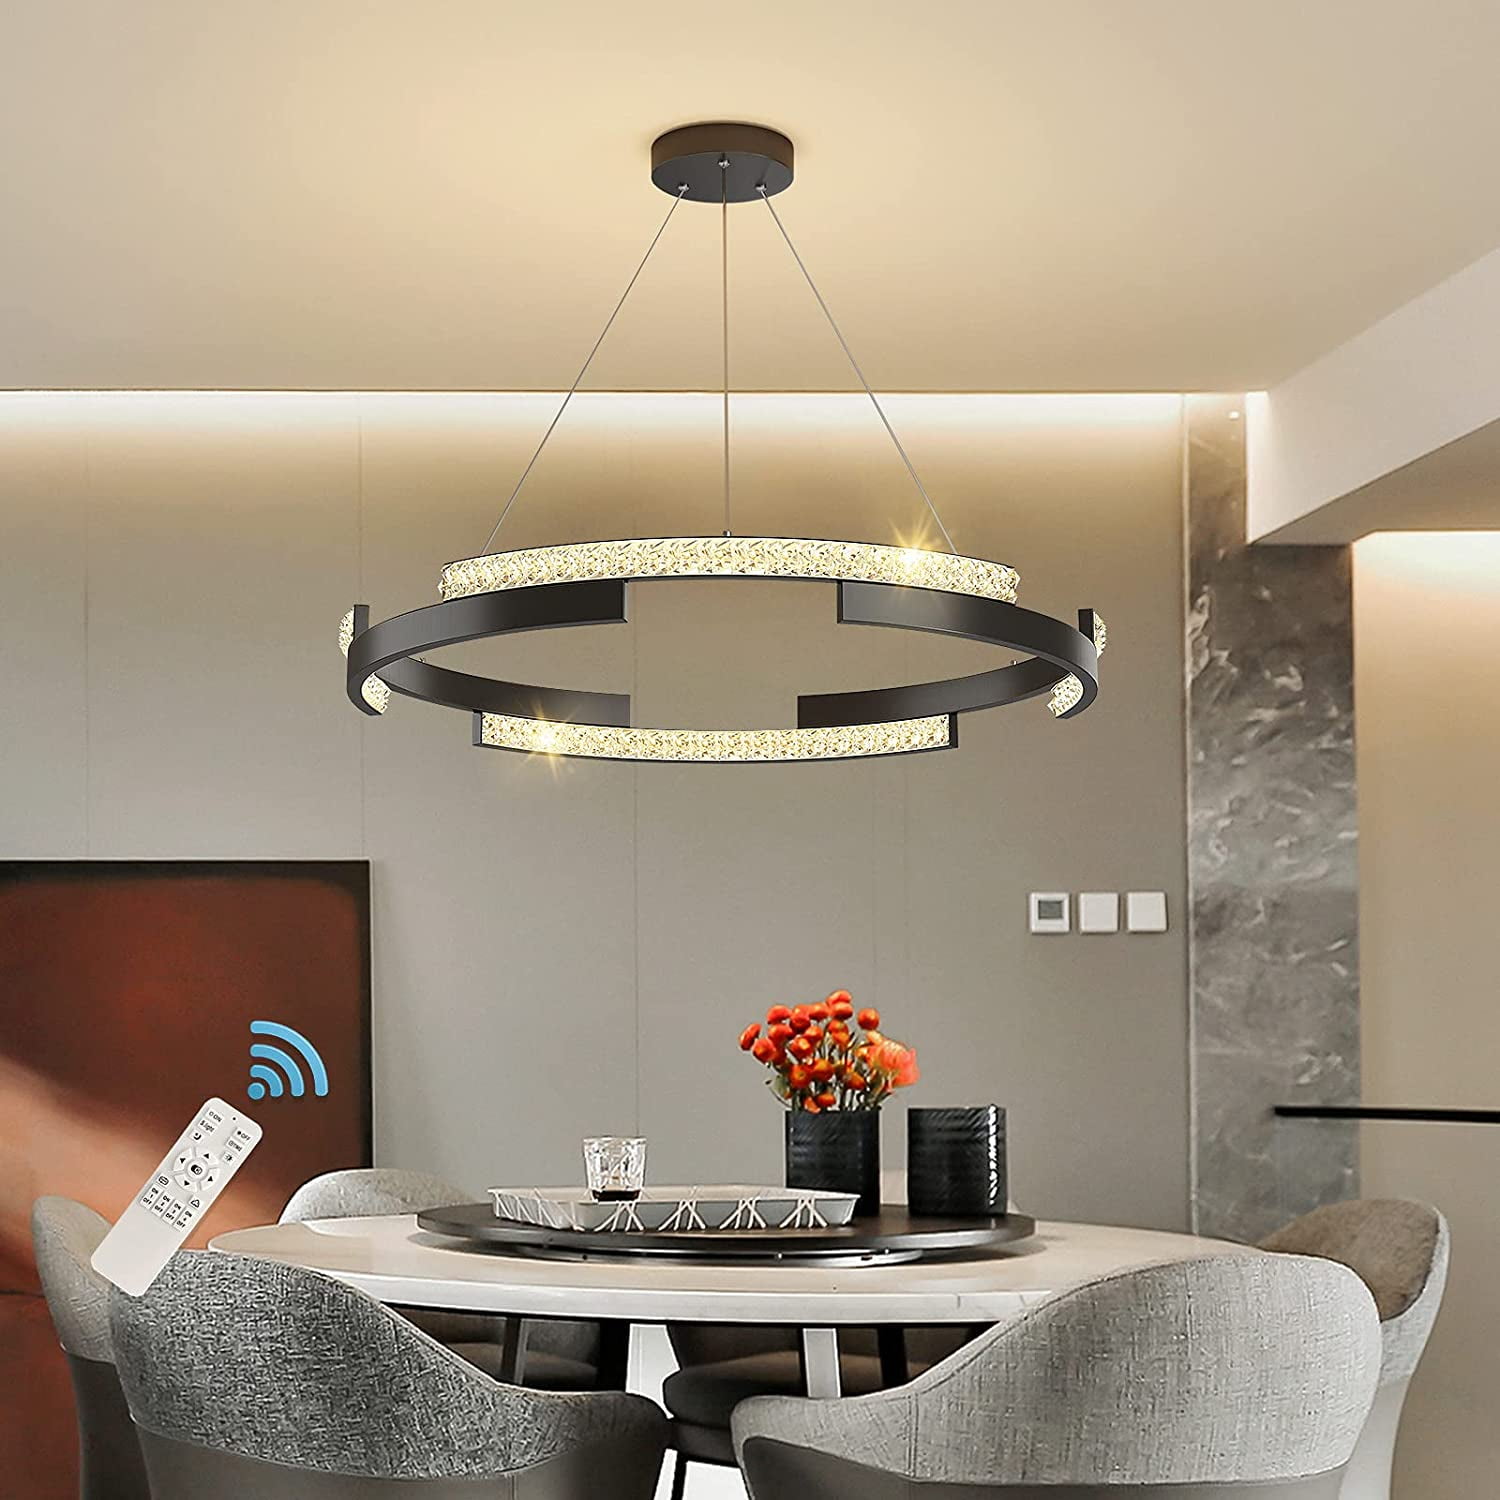 Adjustable Hanging Pendant Light Fixture for Dining Room Kitchen Island GEADI Modern LED Pendant Light Dimmable Creative LED Chandelier 47.2Linear Wave Light Fixture with Remote Control 40W Black